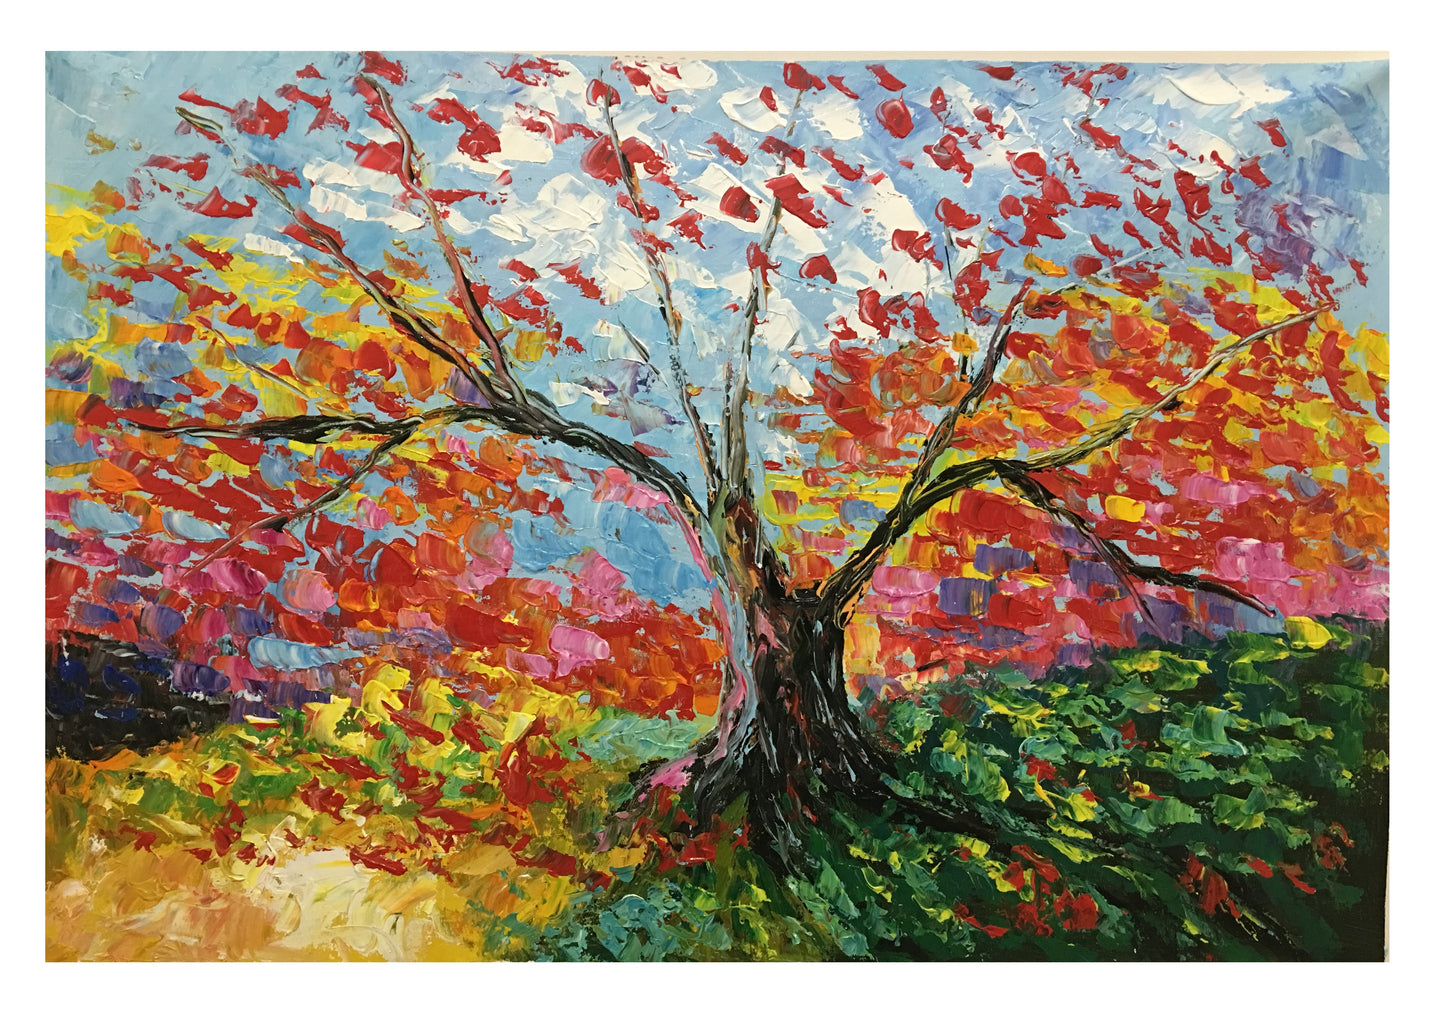 Hand Painted Unique Canvas Art “The Colorful Tree of Life” for Home Decor